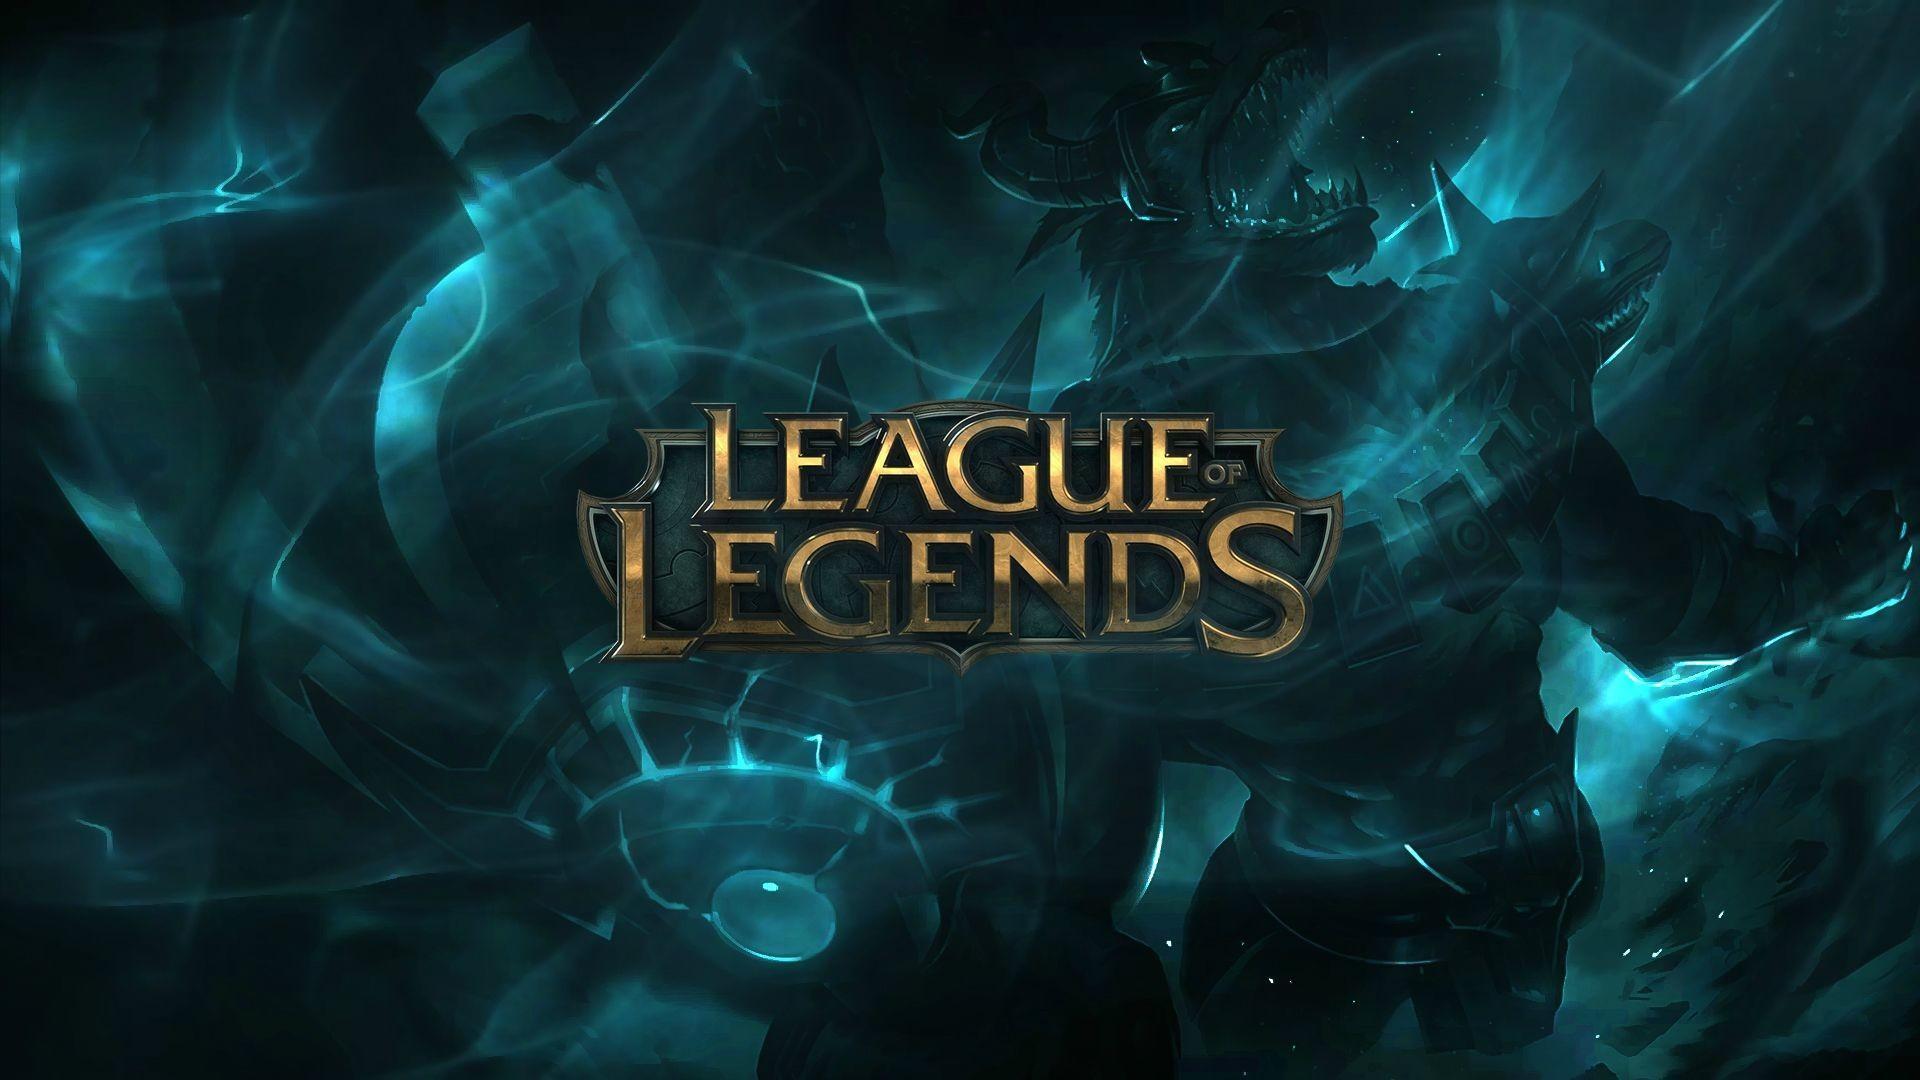 Learn to Play: League of Legends